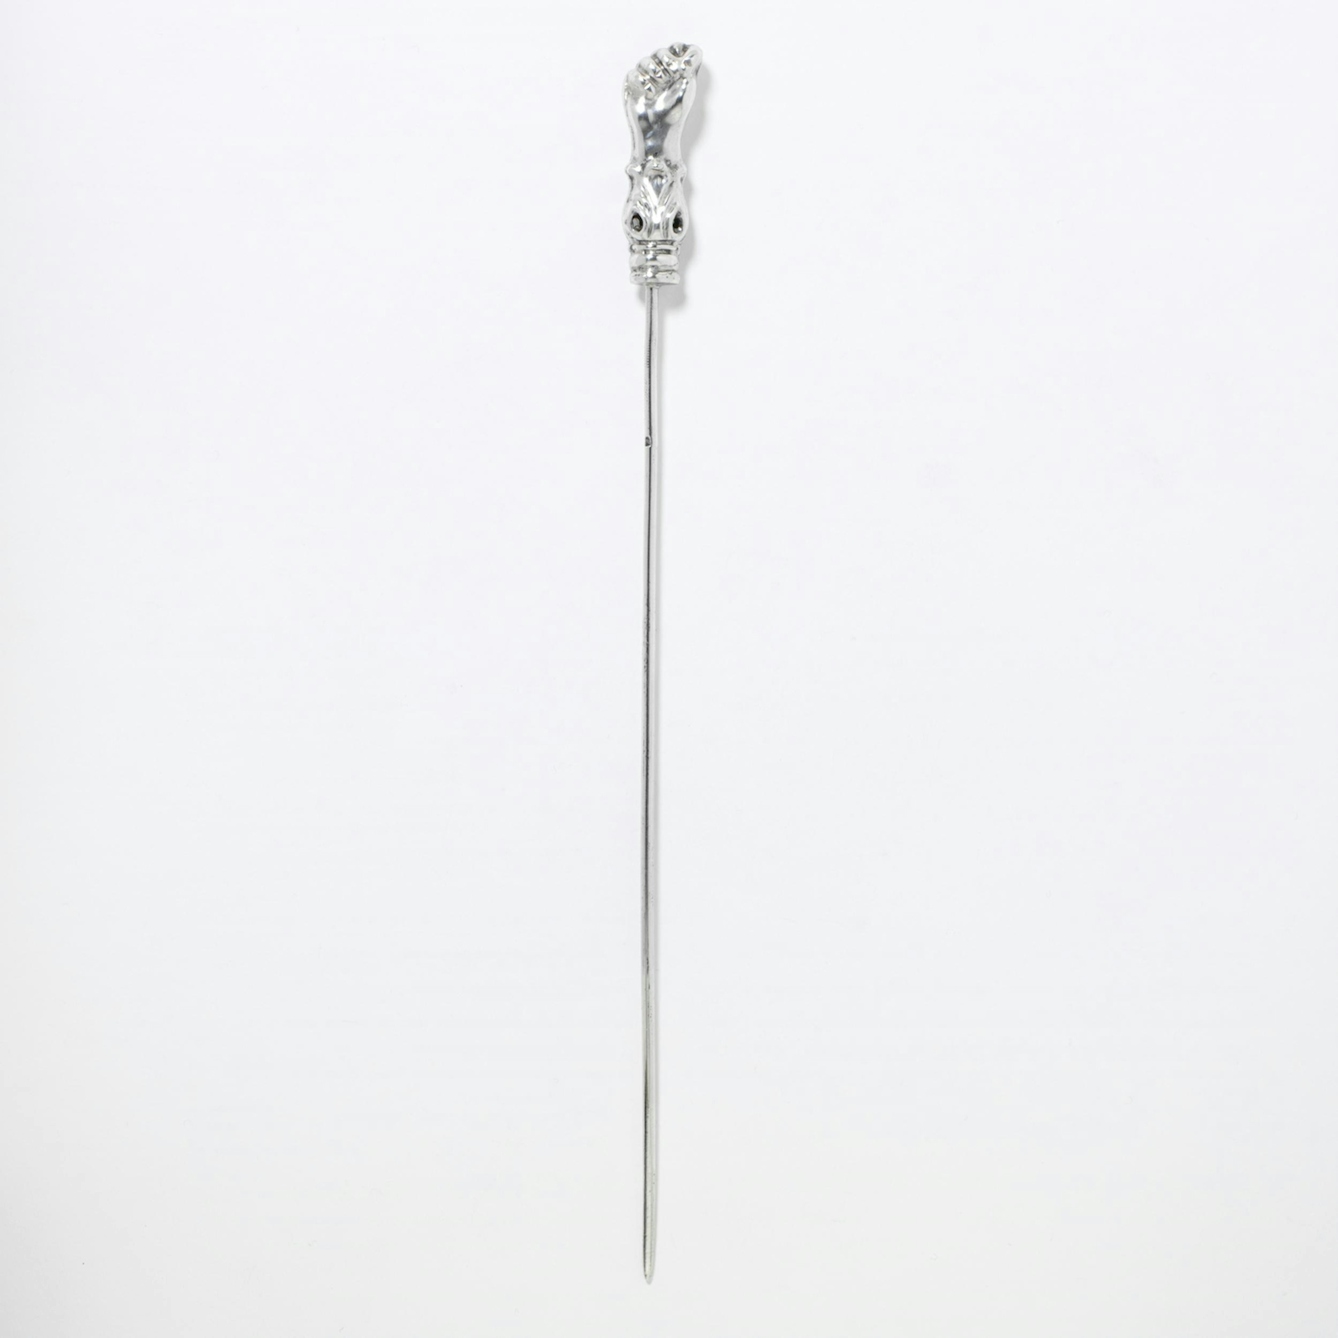 A polished silver pin with a long stem and a small clenched fist at the top.